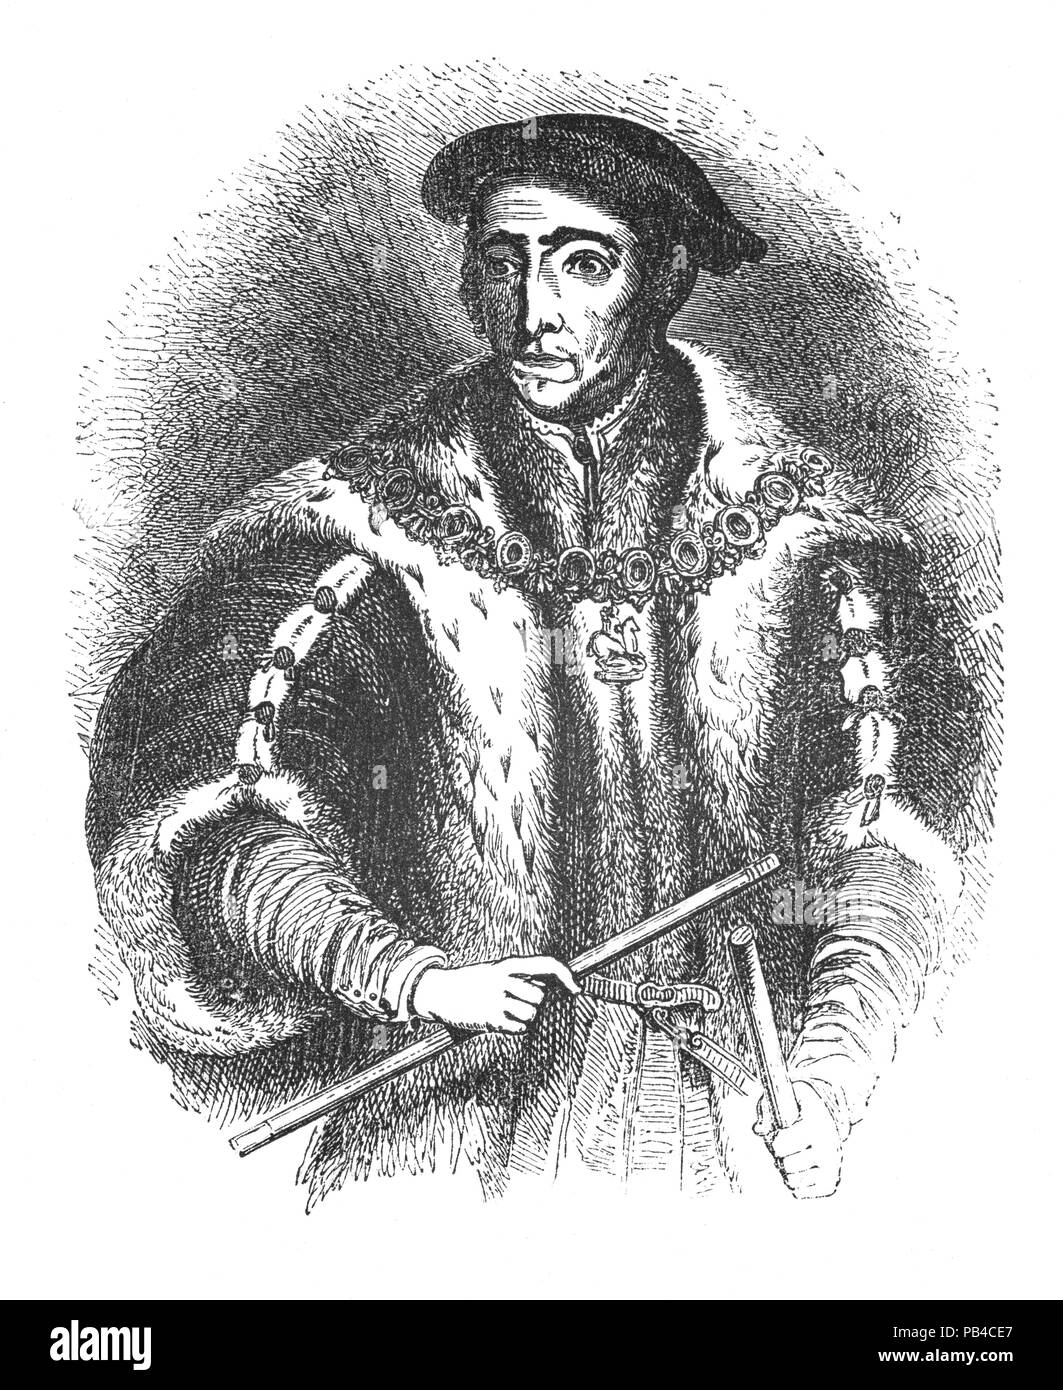 Portrait of Thomas Howard, 3rd Duke of Norfolk (1473-1554),  a prominent Tudor politician. He was an uncle of two of the wives of King Henry VIII of England, namely Anne Boleyn and Catherine Howard, both of whom were beheaded, and he played a major role in the machinations effecting these royal marriages. After falling from favour in 1546, he was stripped of the dukedom and imprisoned in the Tower of London, avoiding execution when King Henry VIII died on 28 January 1547. Stock Photo